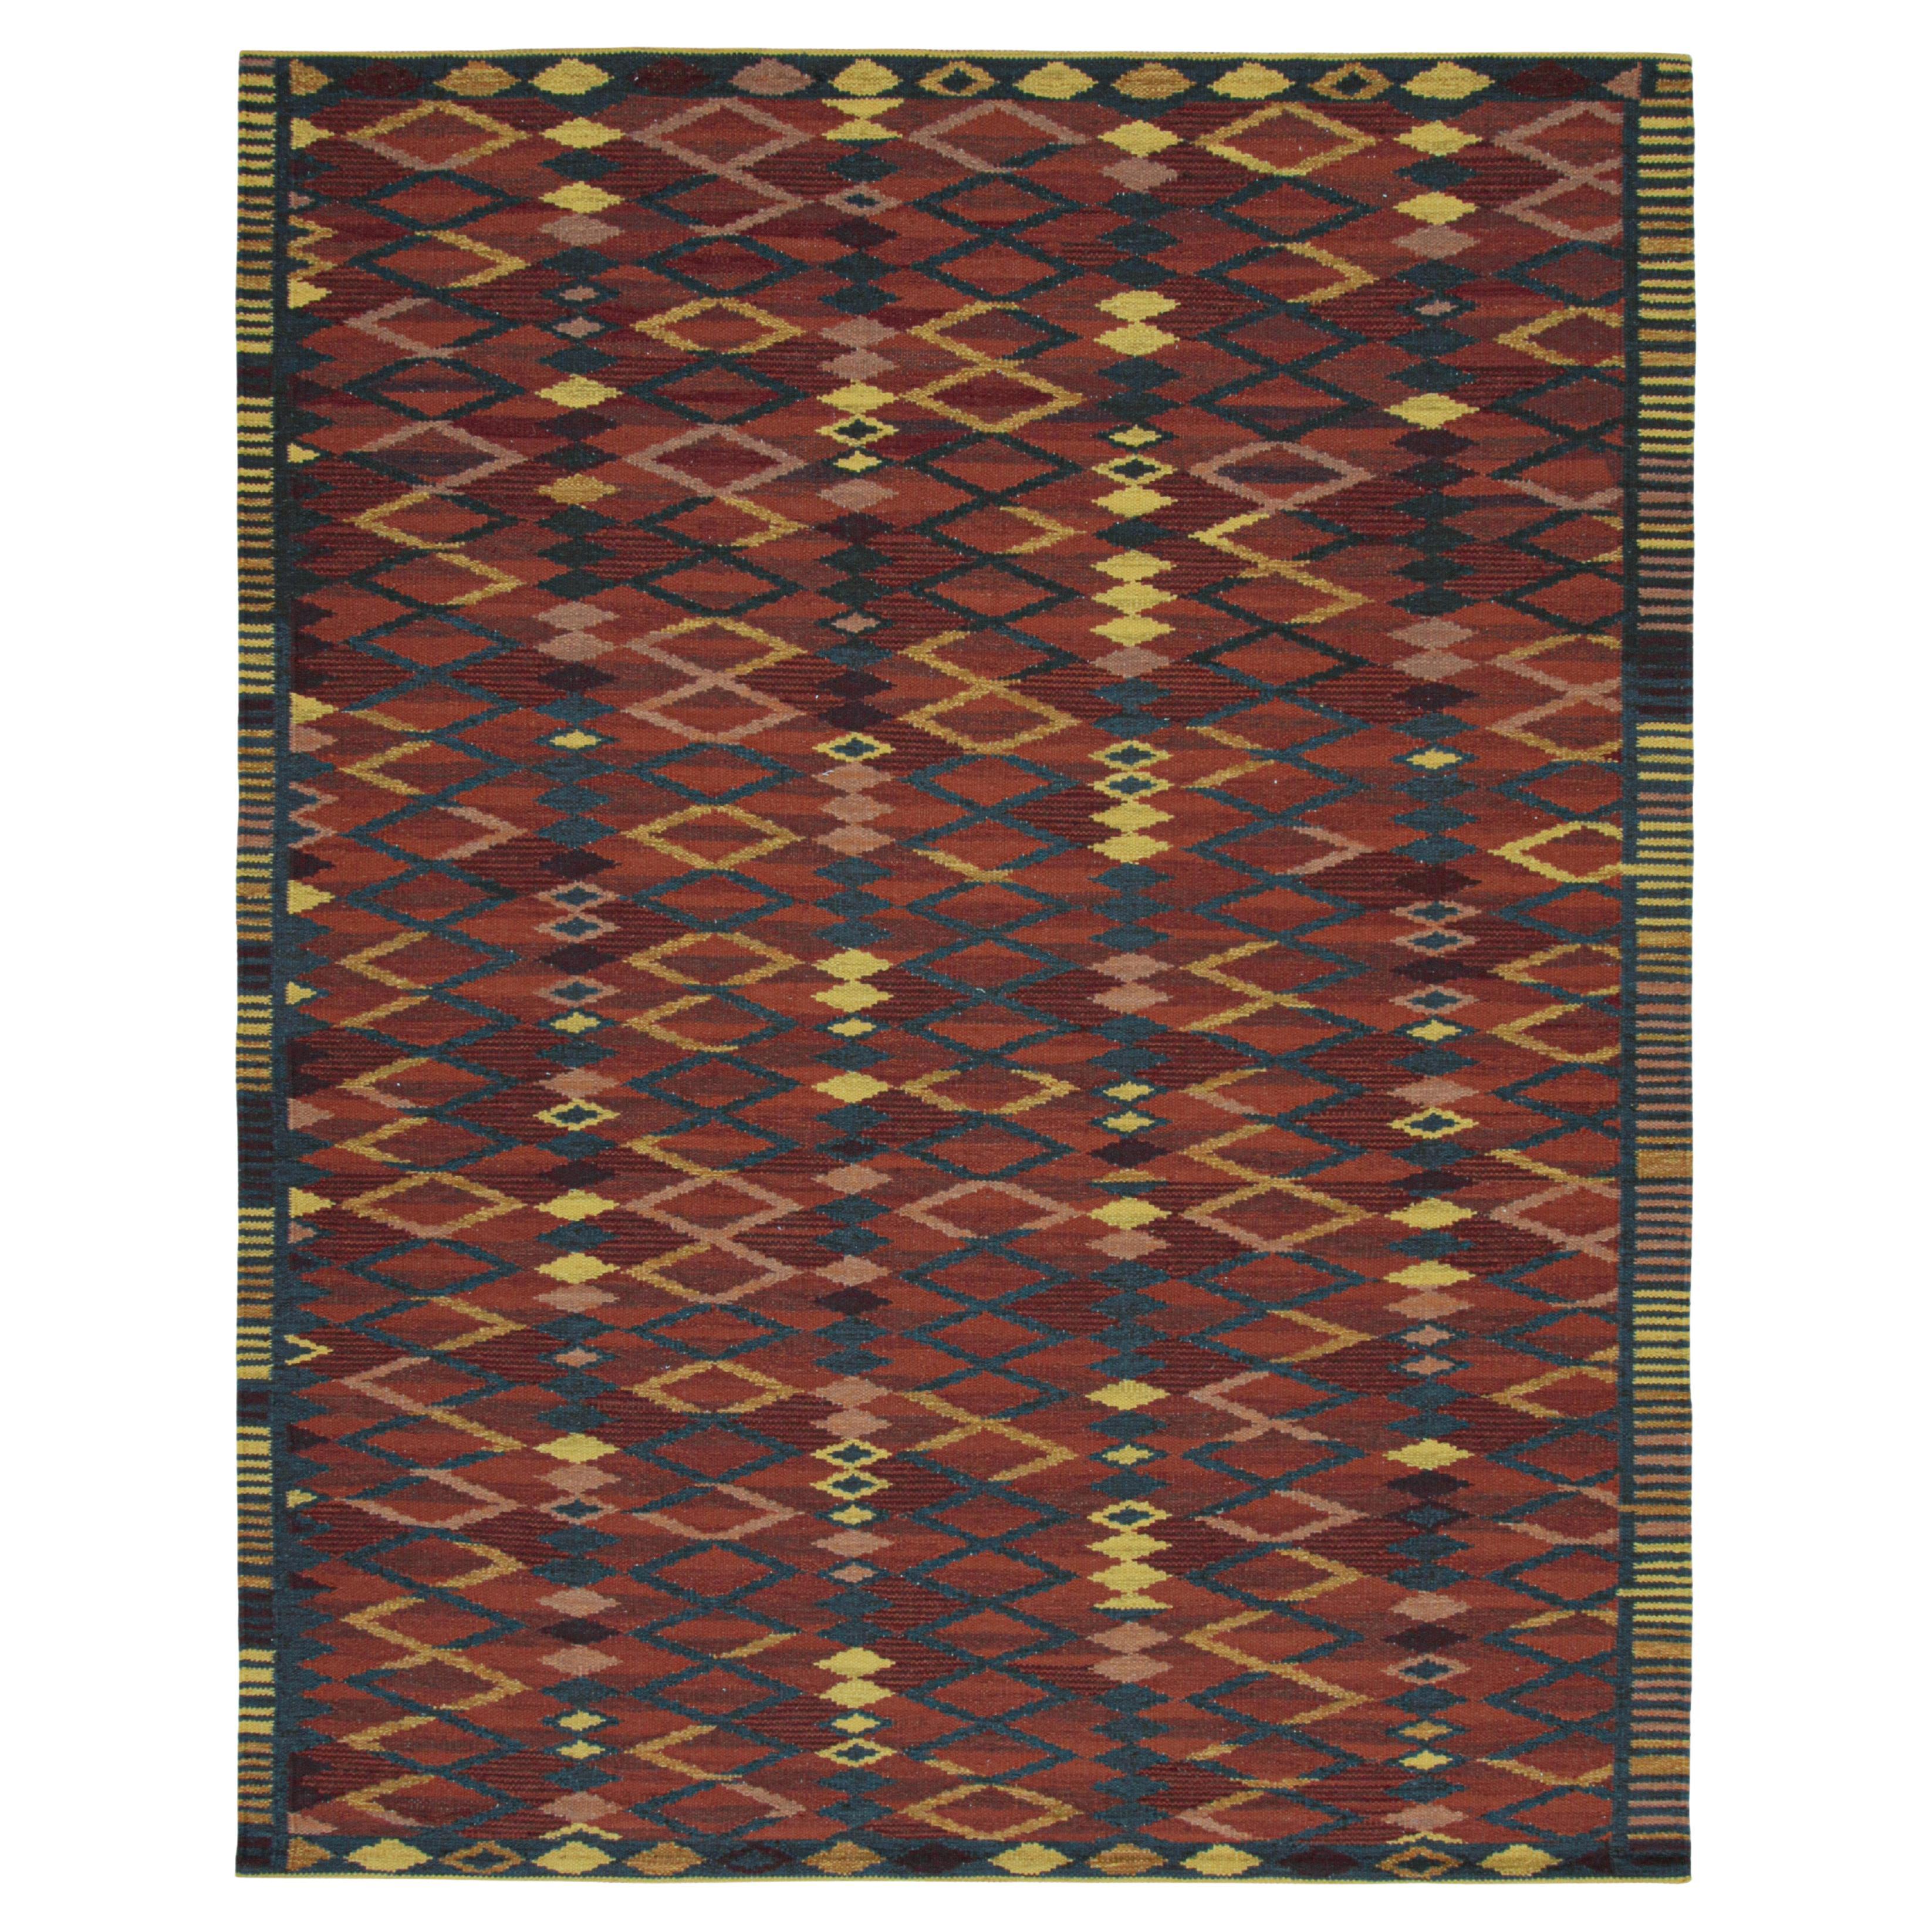 Rug & Kilim’s Scandinavian Style Rug with Red and Blue Geometric Patterns